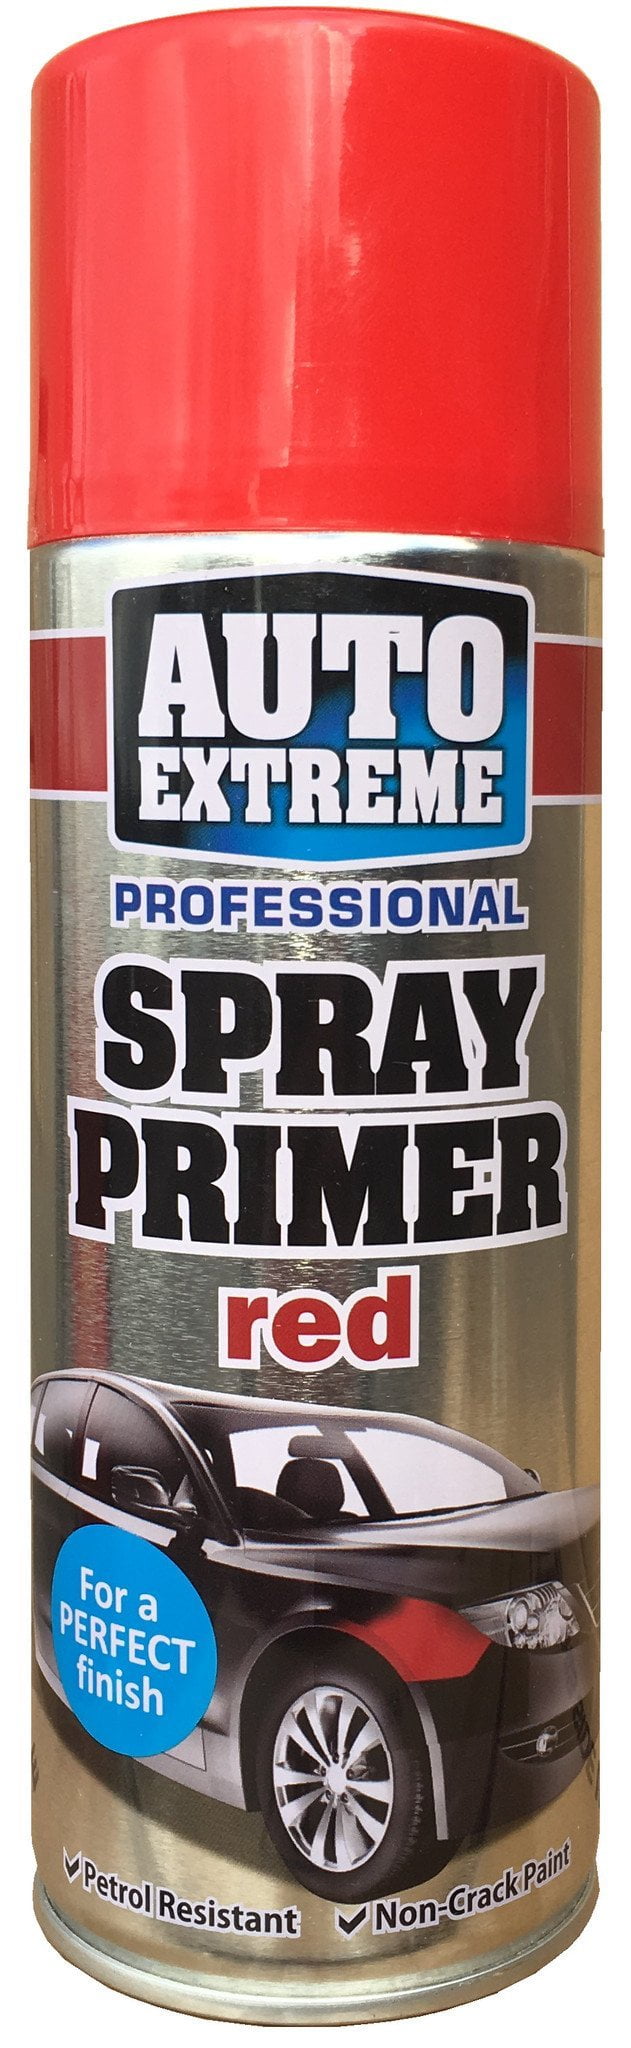 Auto Extreme Spray Primer Red 400ml 9953 (Parcel Rate)